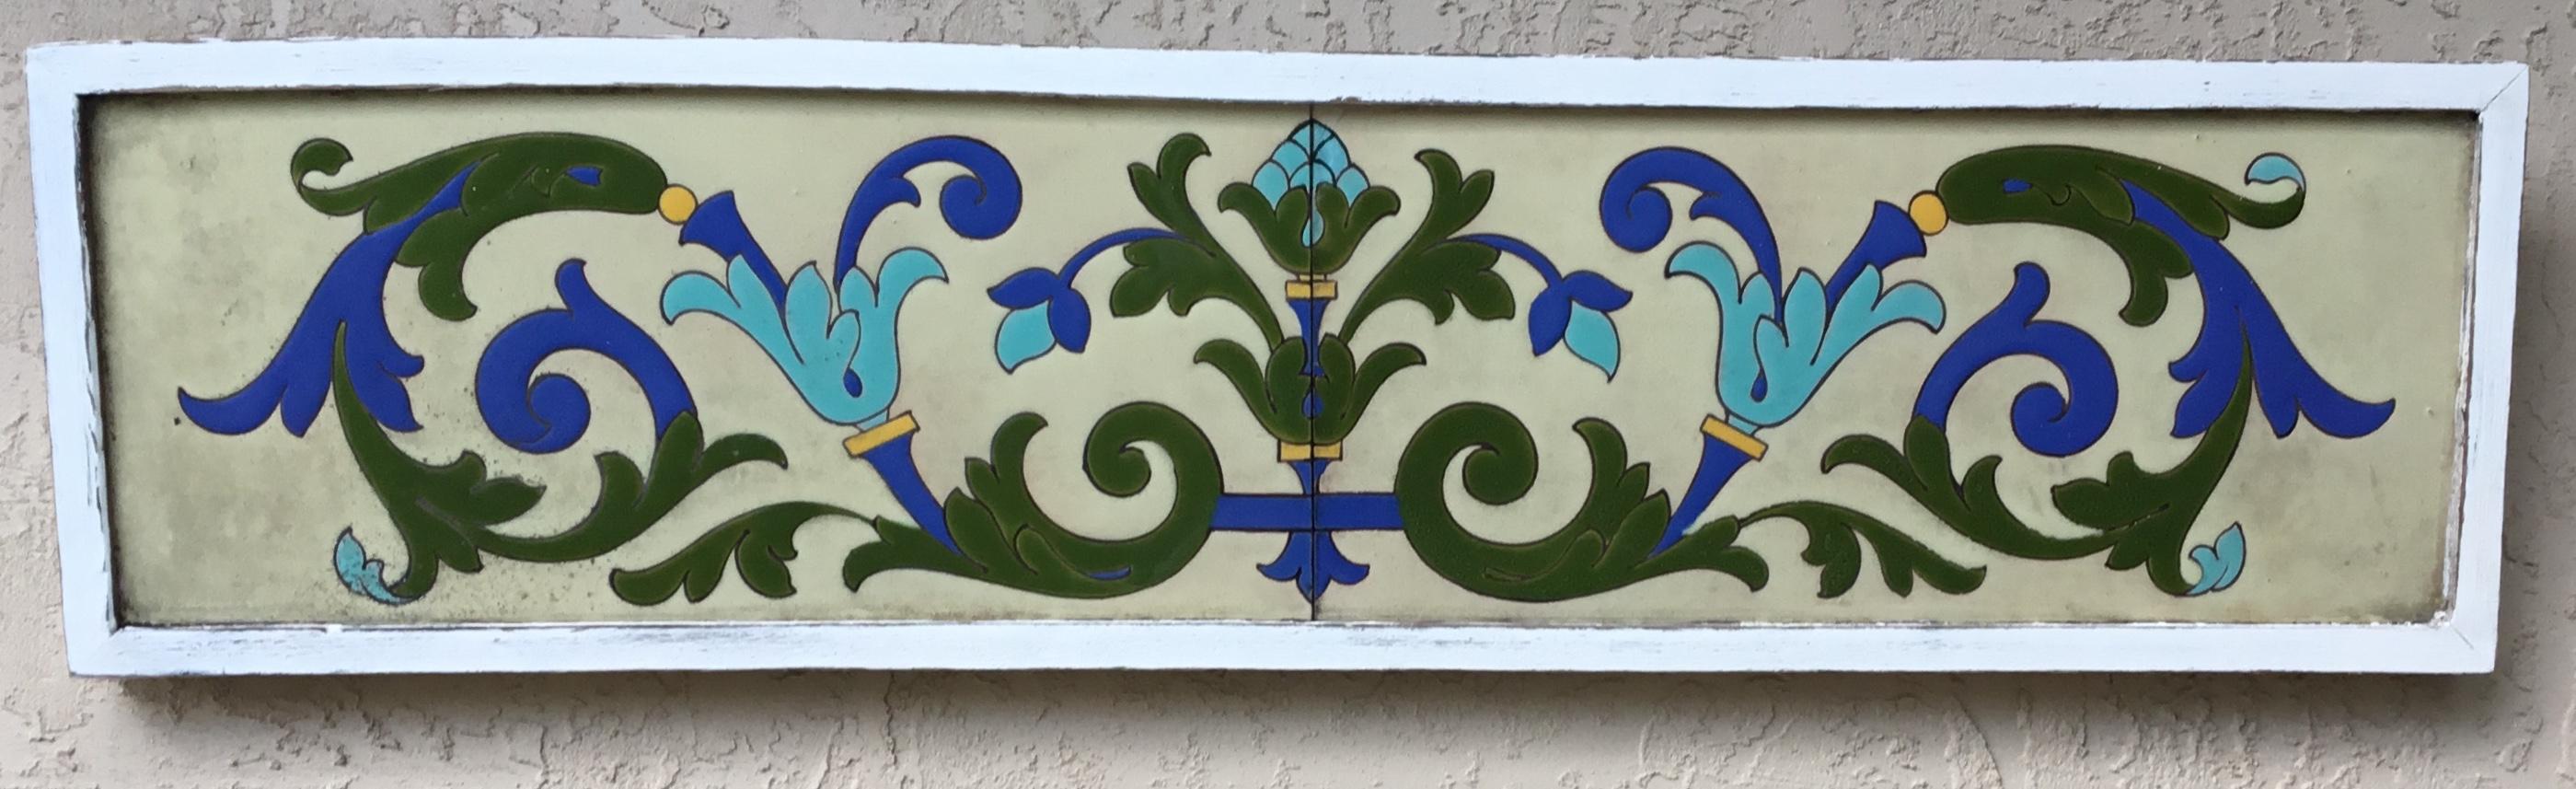 Exceptional ceramic wall hanging made of two tiles, handmade painted and glaze, beautiful motifs of flowers and scrolling vines, with vibrant colors of turquoise ,green and cobalt blue on a cream color background. The wall hanging is professionally